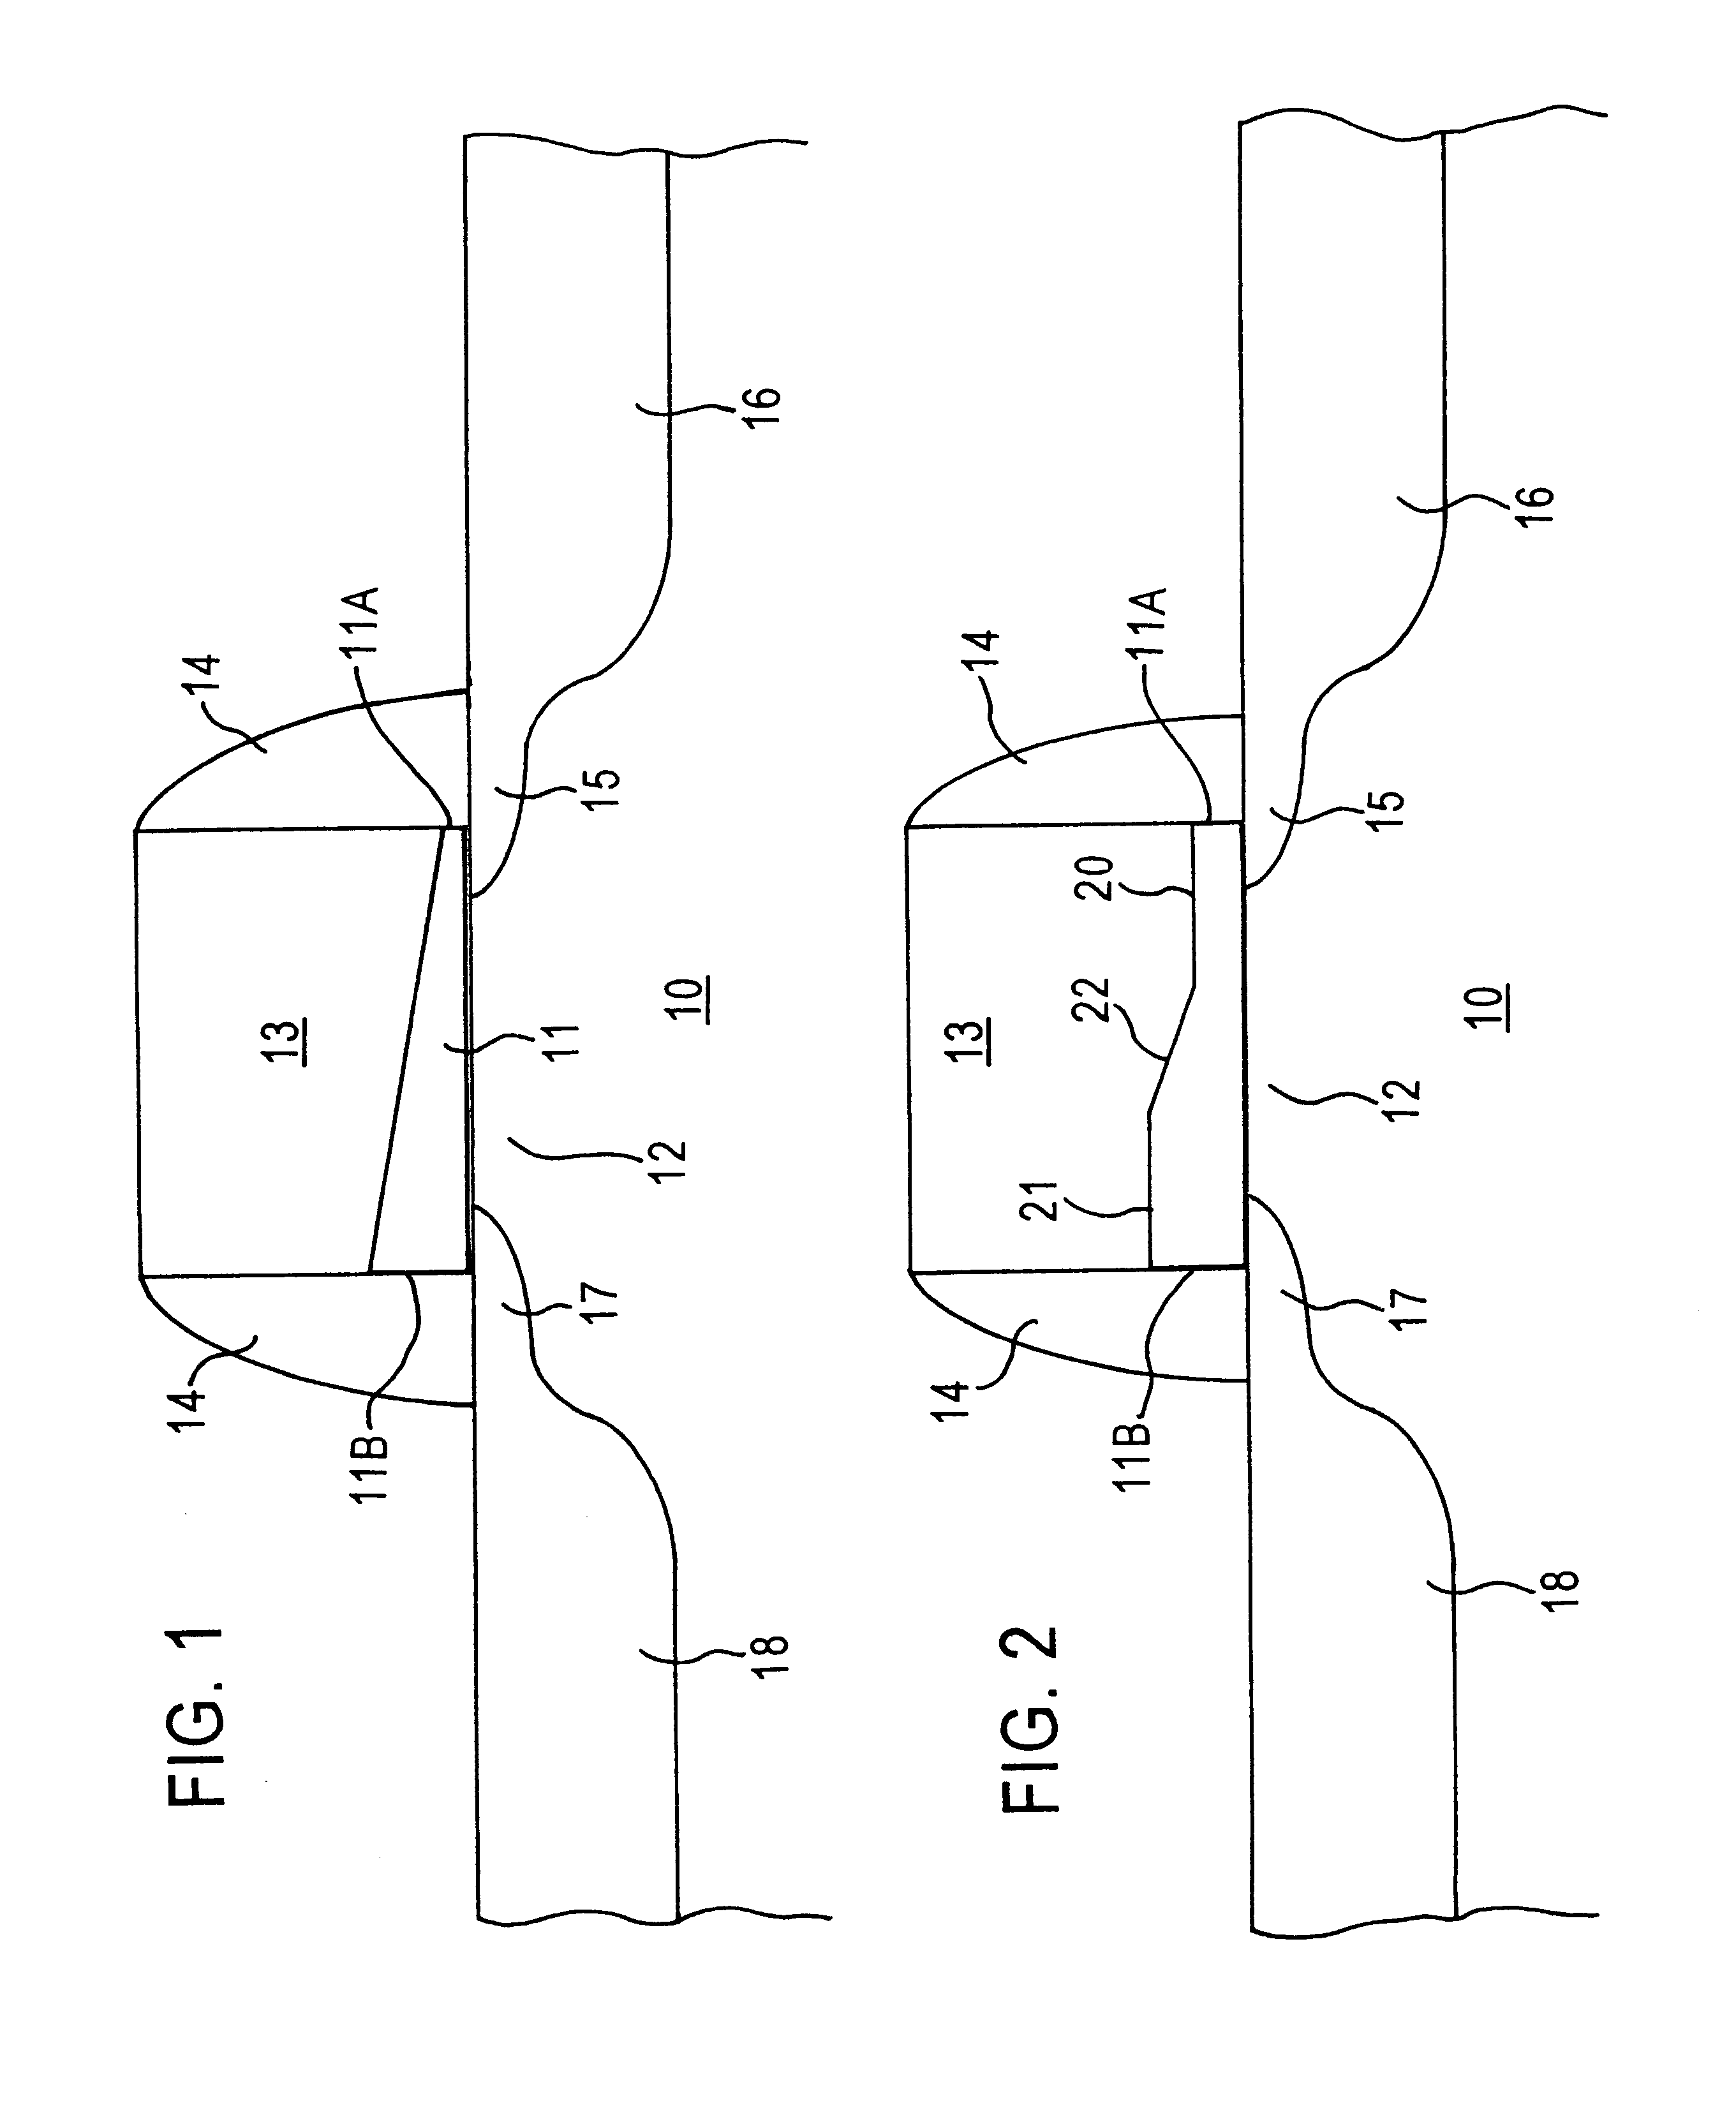 Semiconductor device with a modulated gate oxide thickness